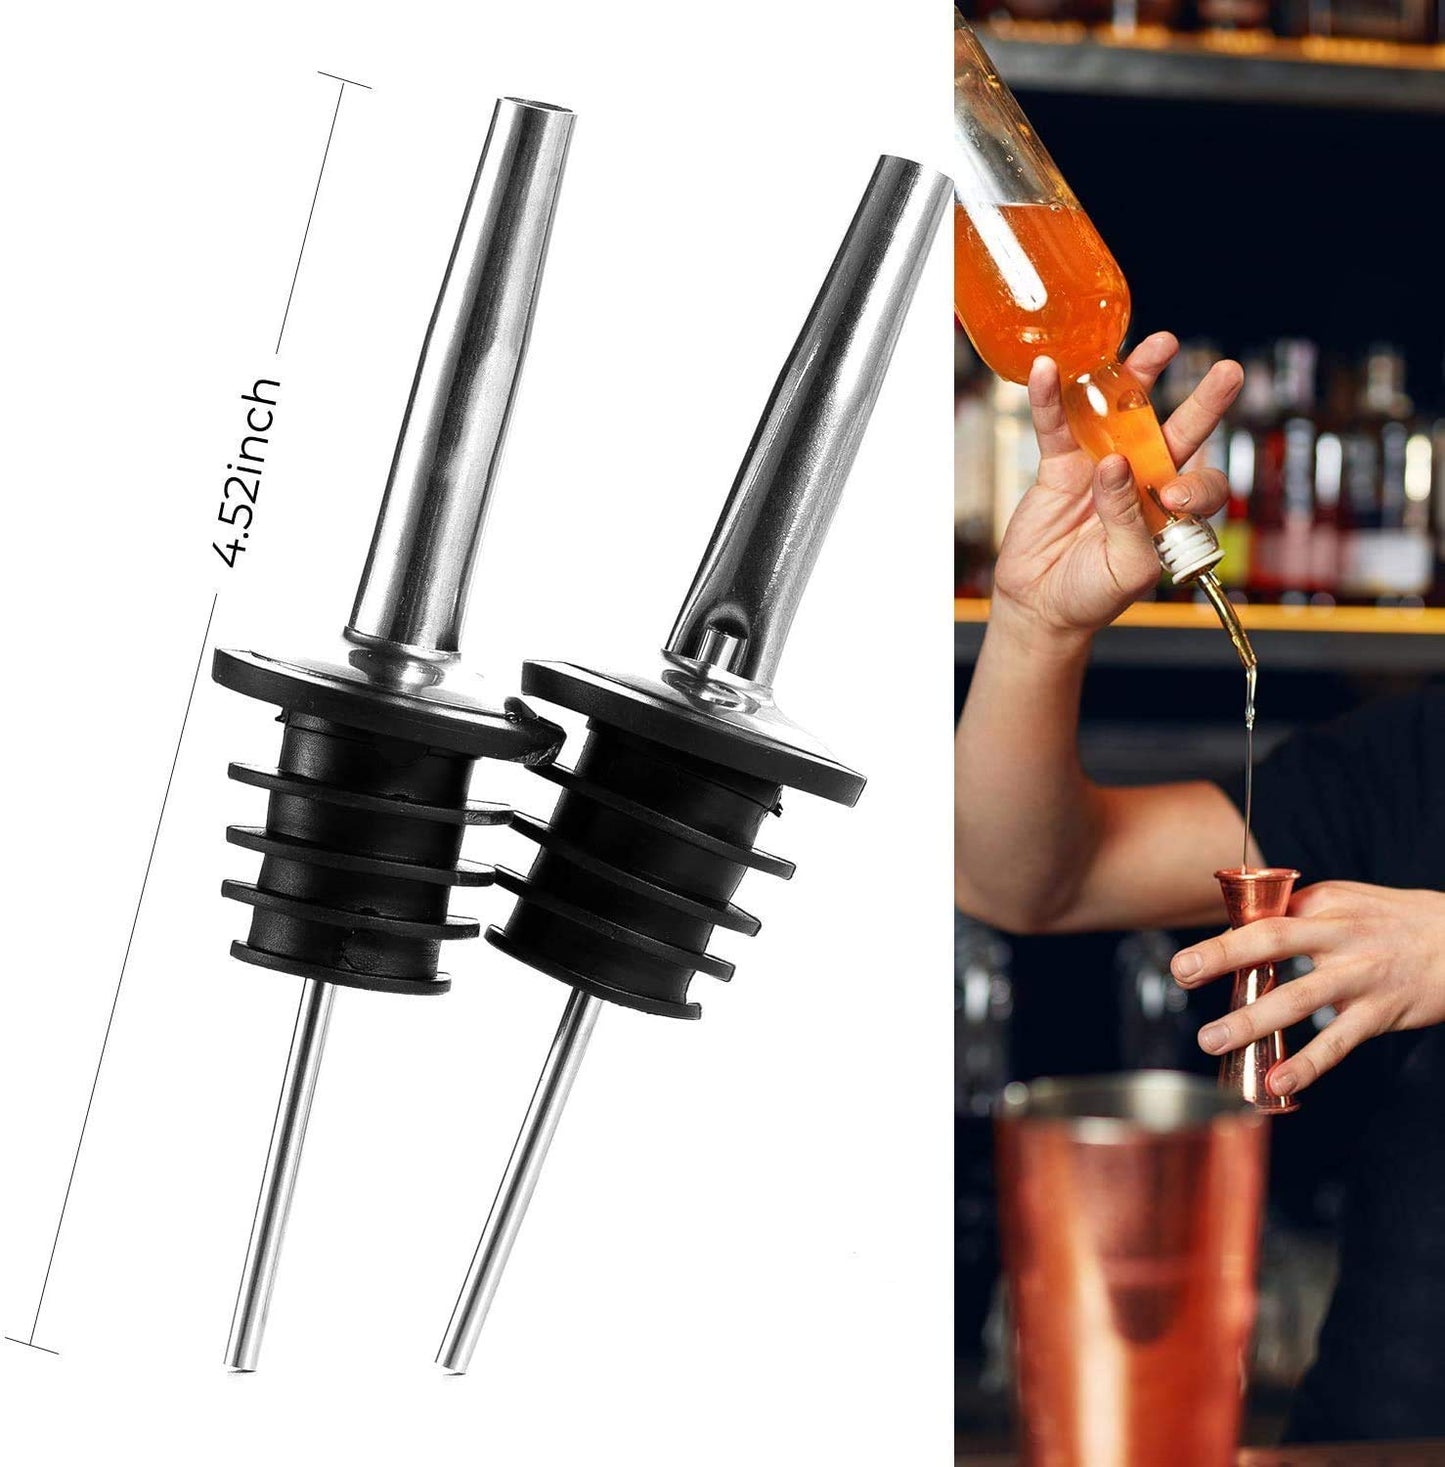 Rudra Exports Stainless Steel Cocktail Muddler Peg Measurer Jigger 30 and 60 ml, Liquor Bottle Pourers Mixing Spoons Ice Tongs 6 Pcs Set